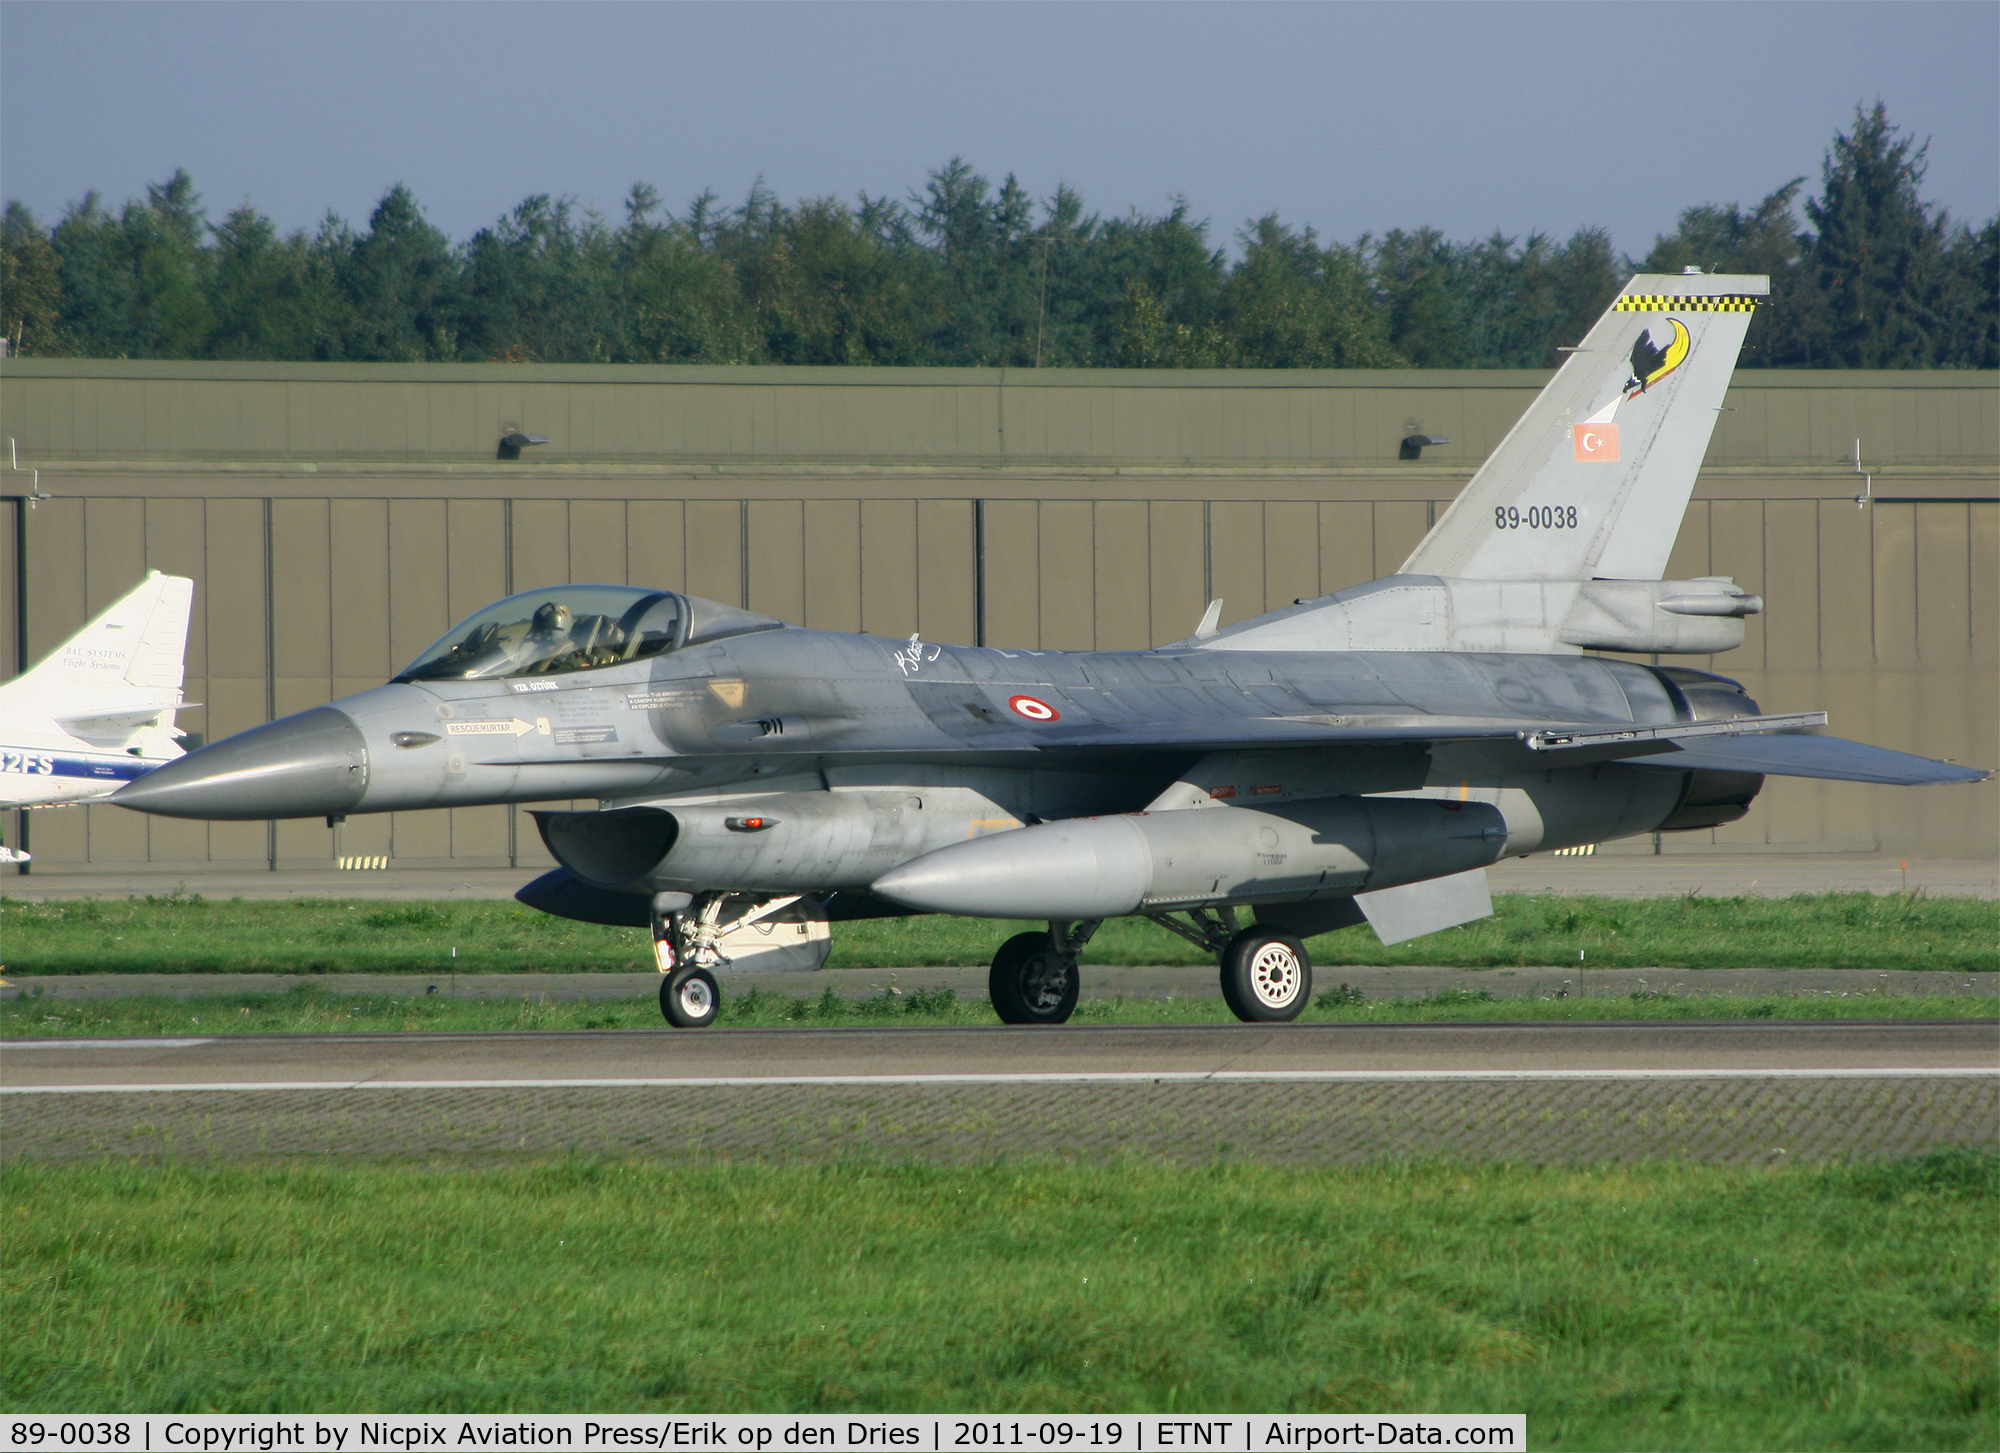 89-0038, 1989 General Dynamics F-16C Fighting Falcon C/N 4R-56, Turkish AF F-16C 89-0038 operated out of Wittmund AB during the NATO exercise Brilliant Arrow-2011